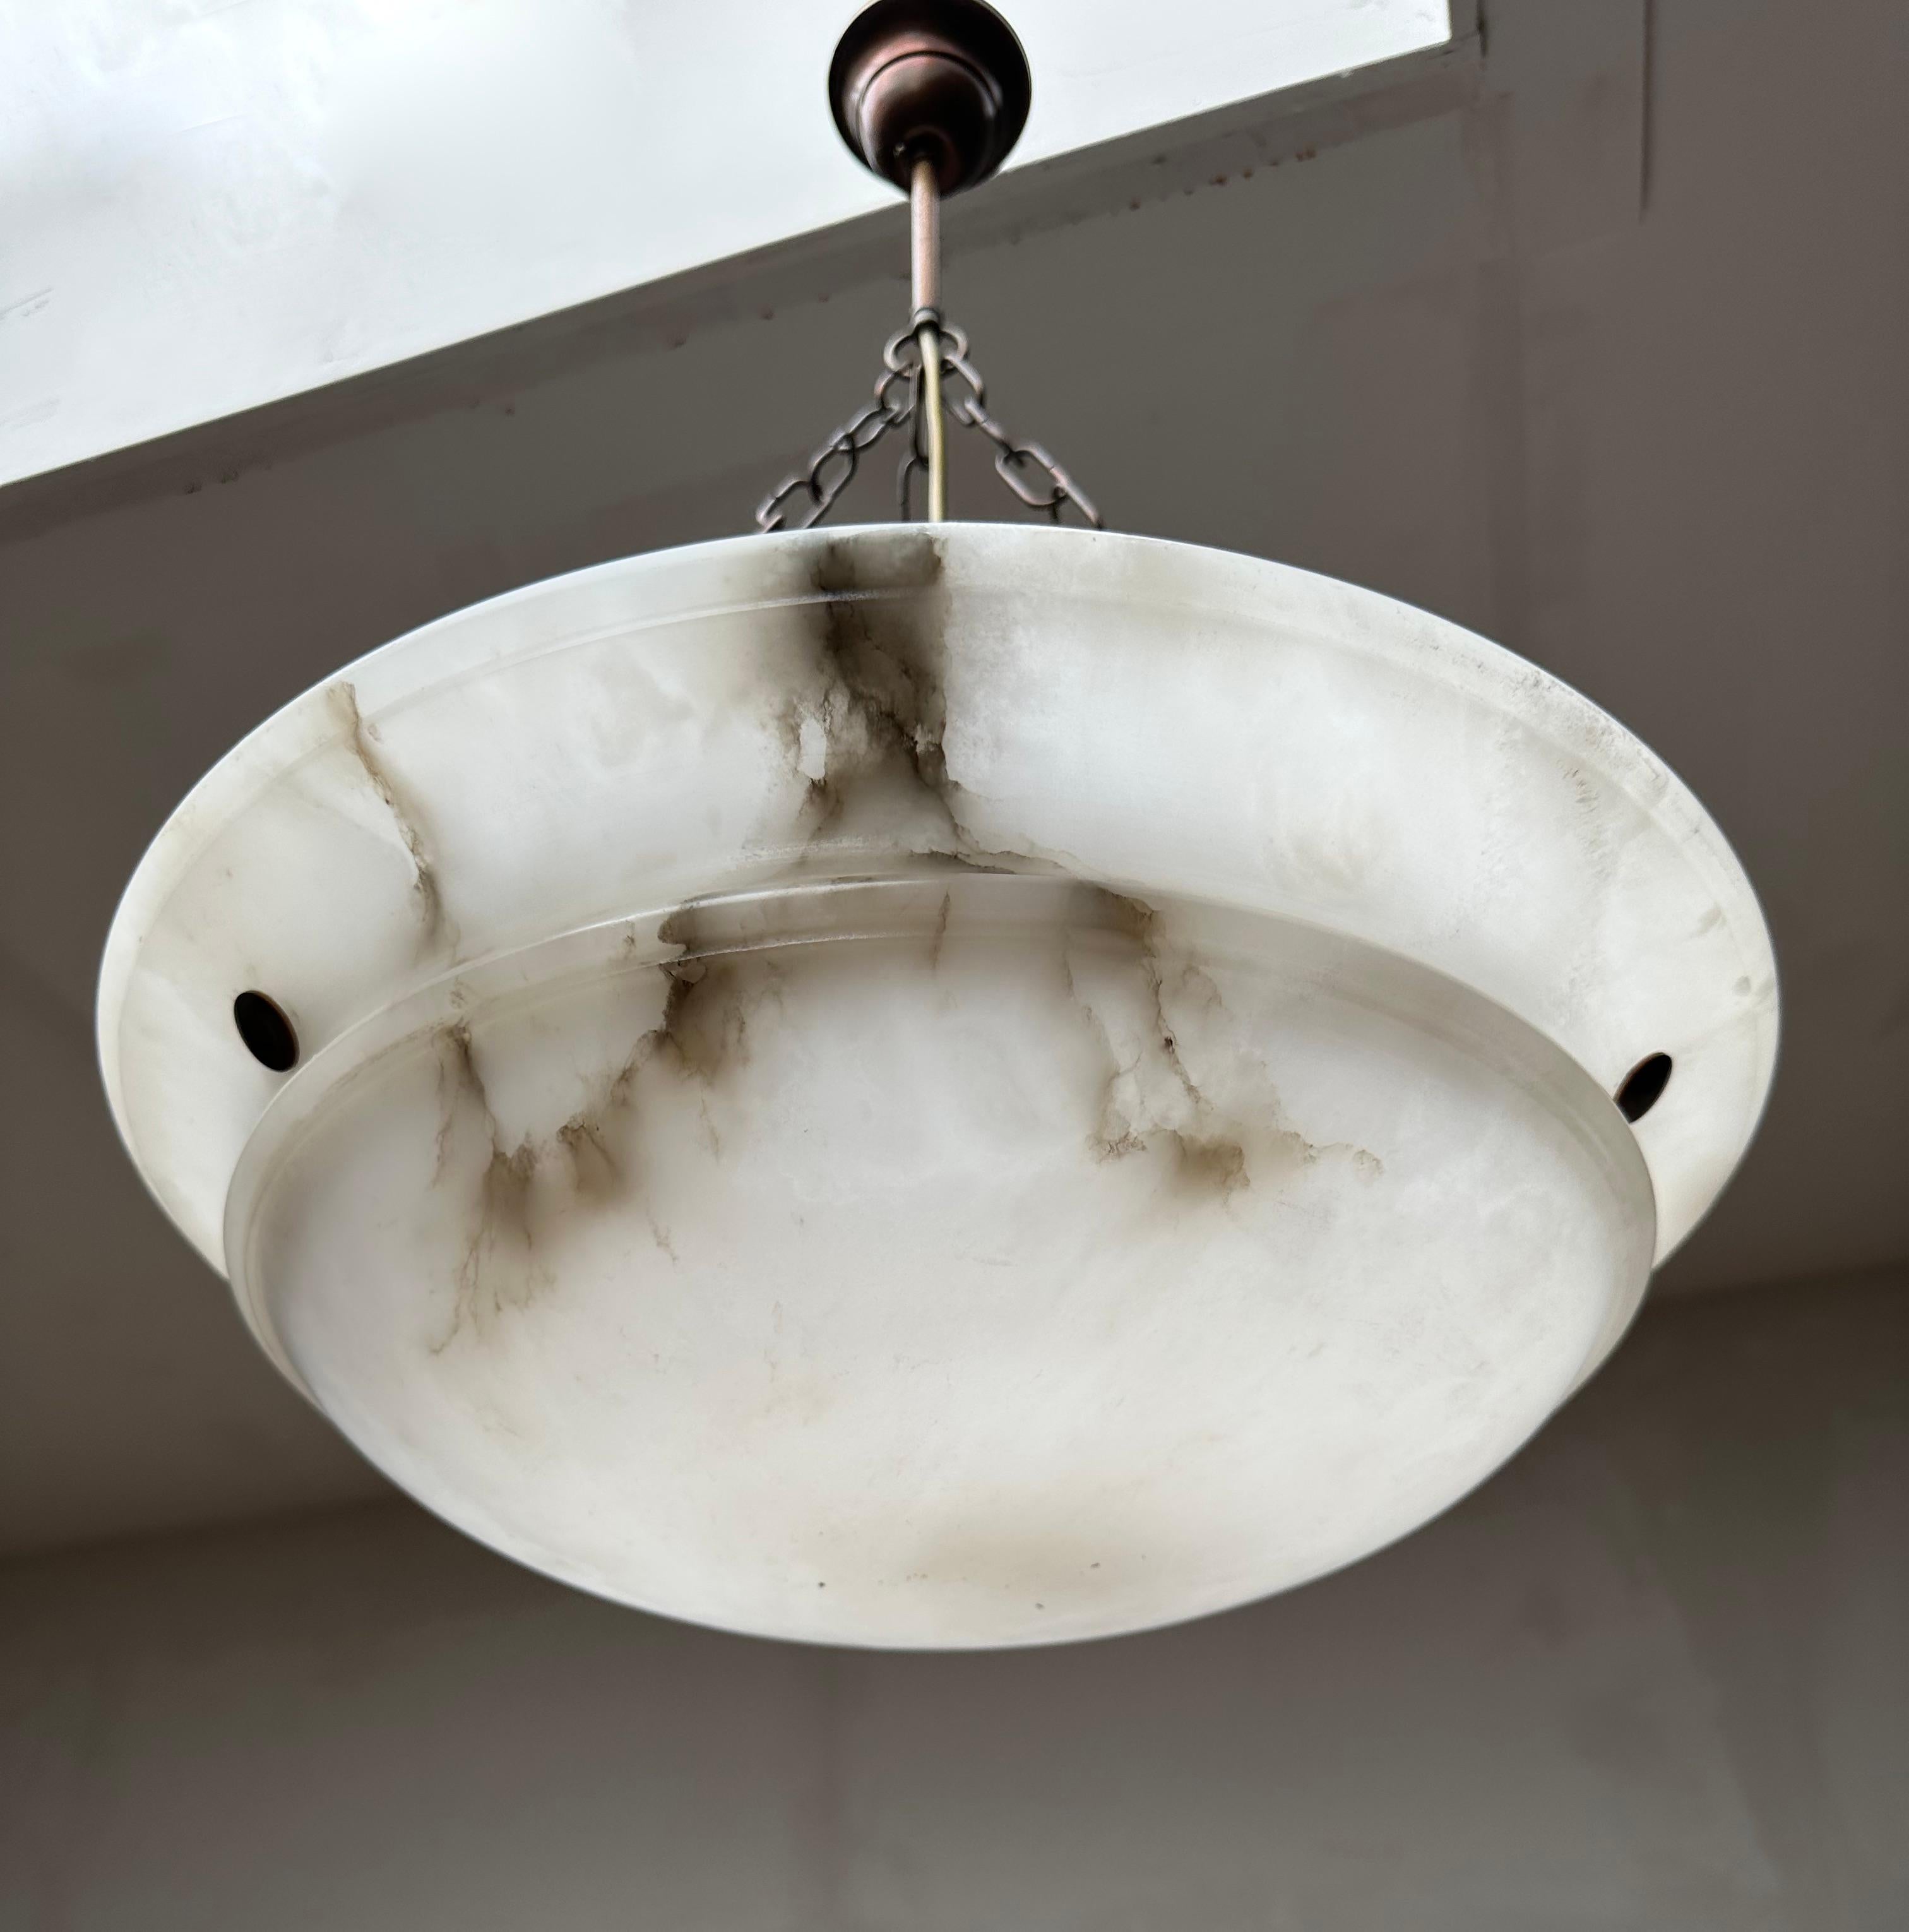 Superb condition chandelier with a stunning and large size alabaster mineral stone shade, 17.7 inches diameter.

This stylish fixture has a very calm look and feel and thanks to it size, deep bowl shape and remarkable design this alabaster